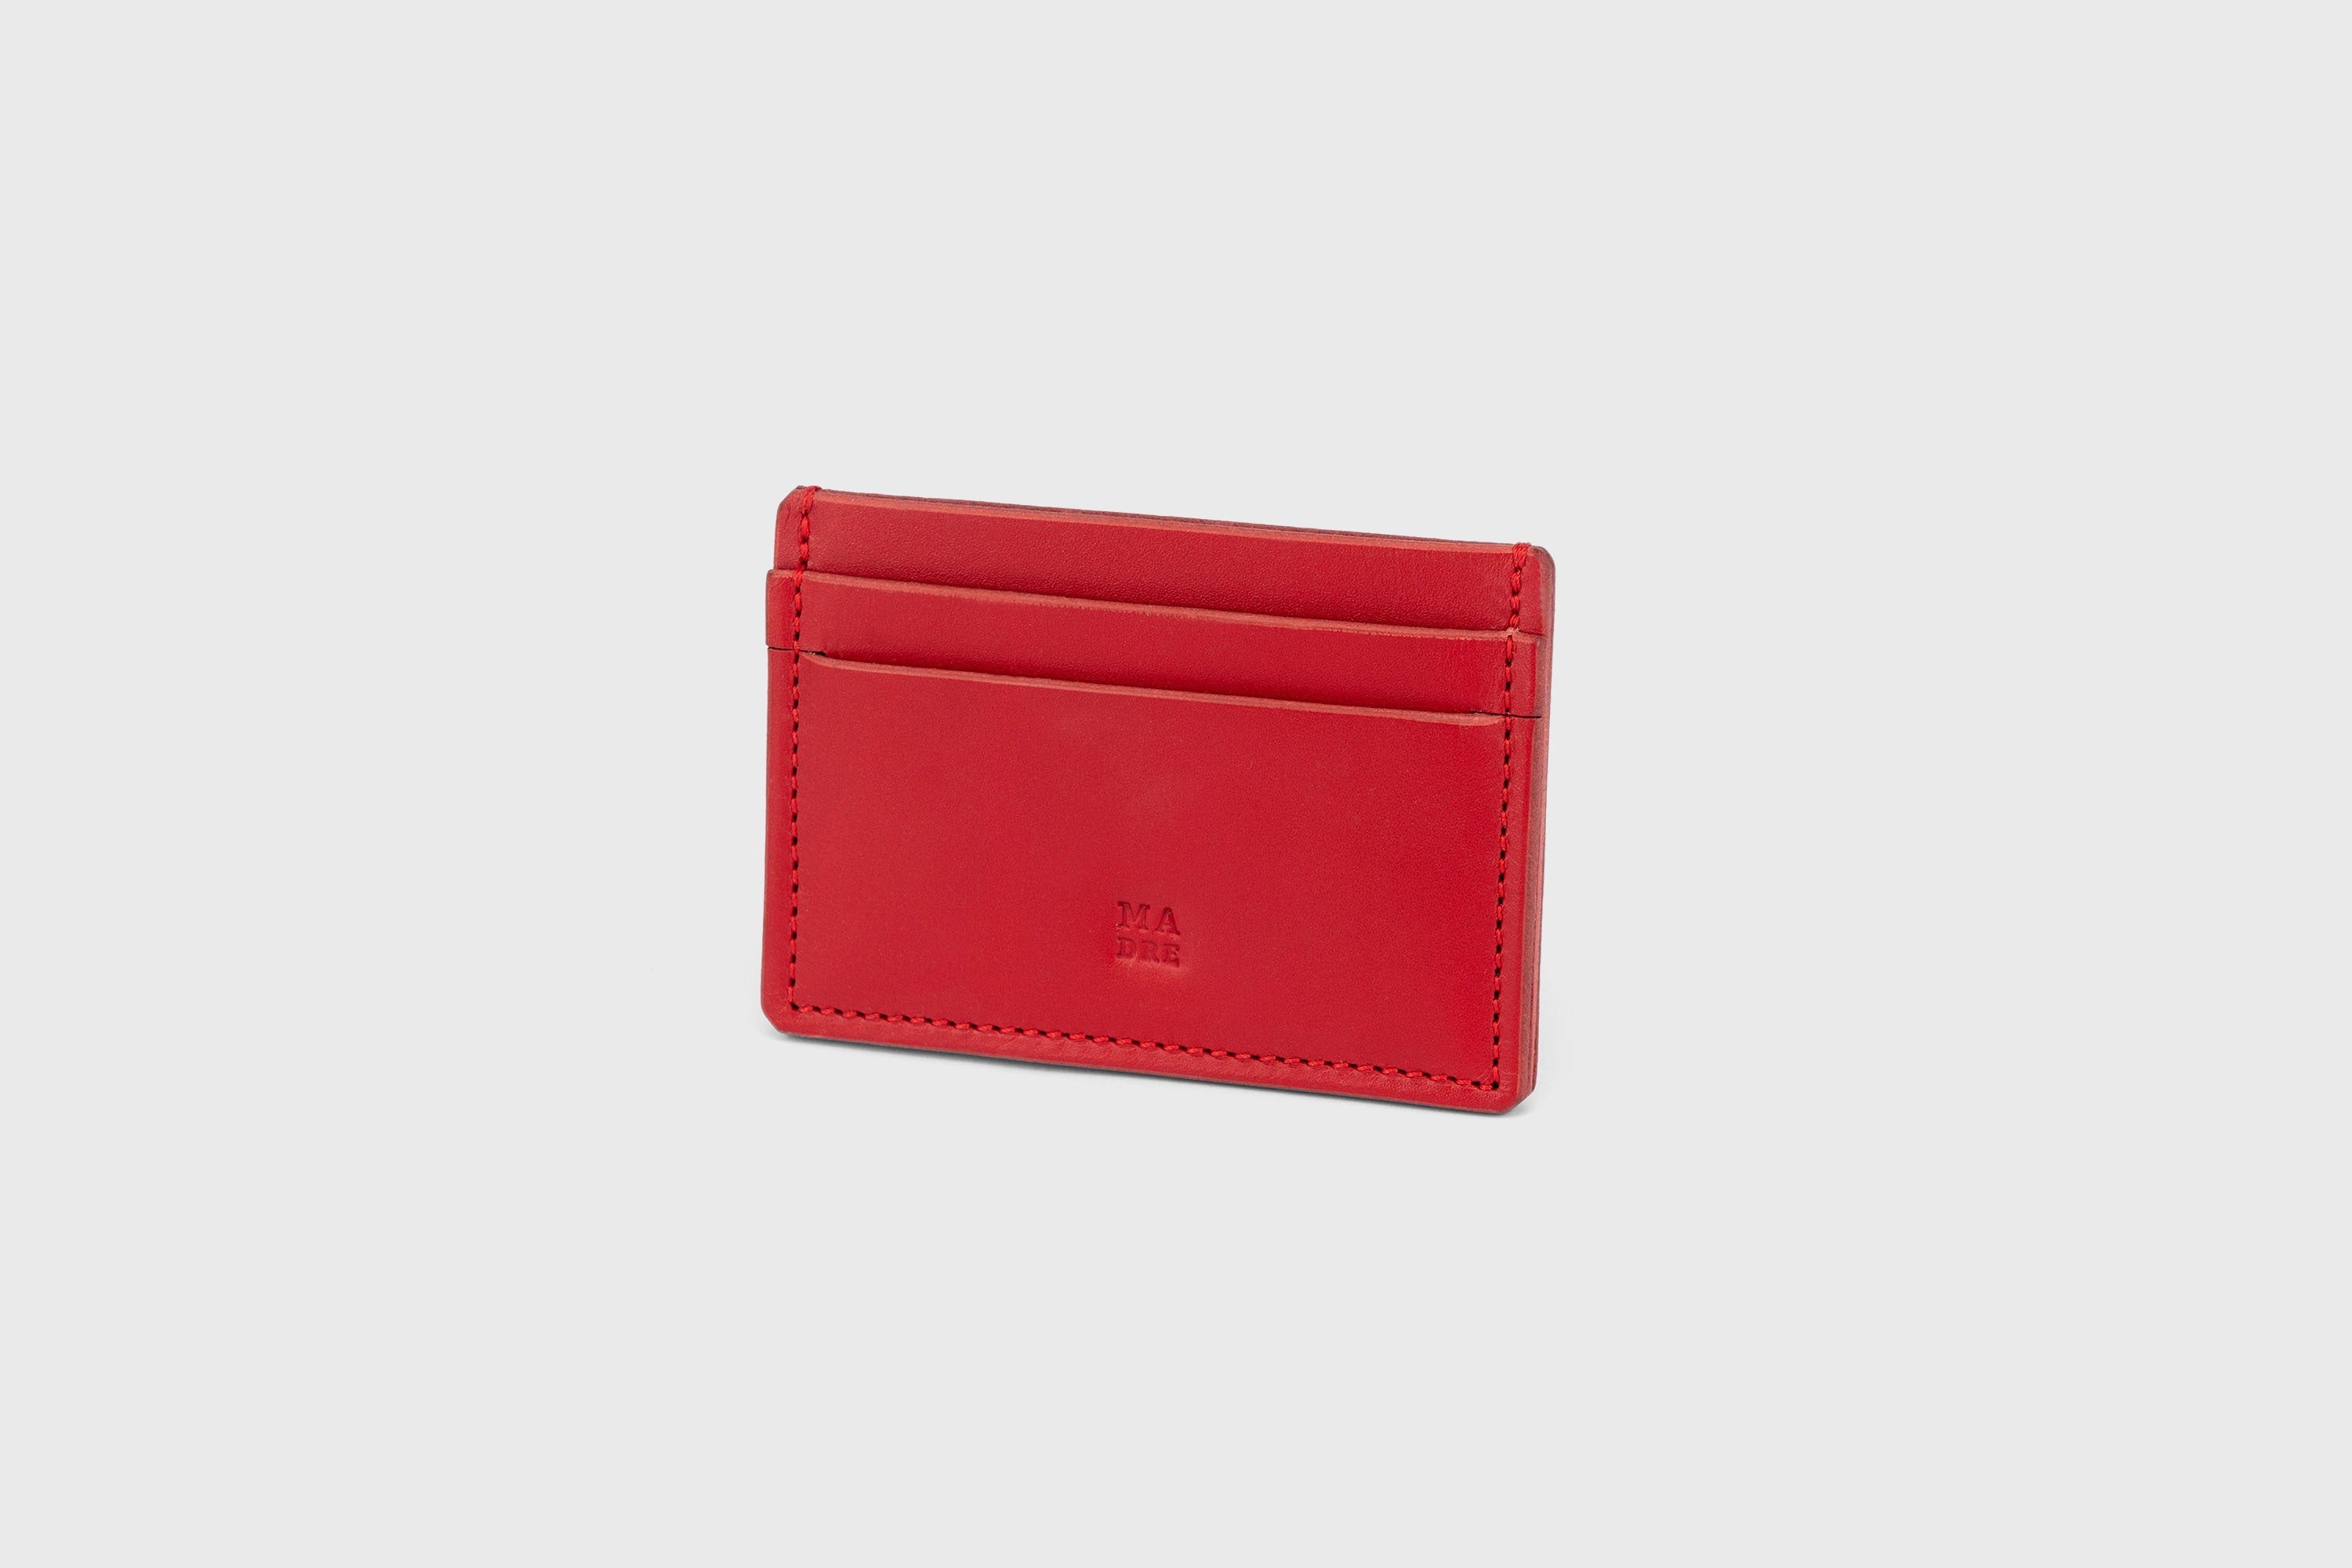 Credit Card Wallet in Red Leather Vachetta Vegetable Tanned Leather Handmade and Designed by Atelier Madre Manuel Dreesmann Barcelona Spain